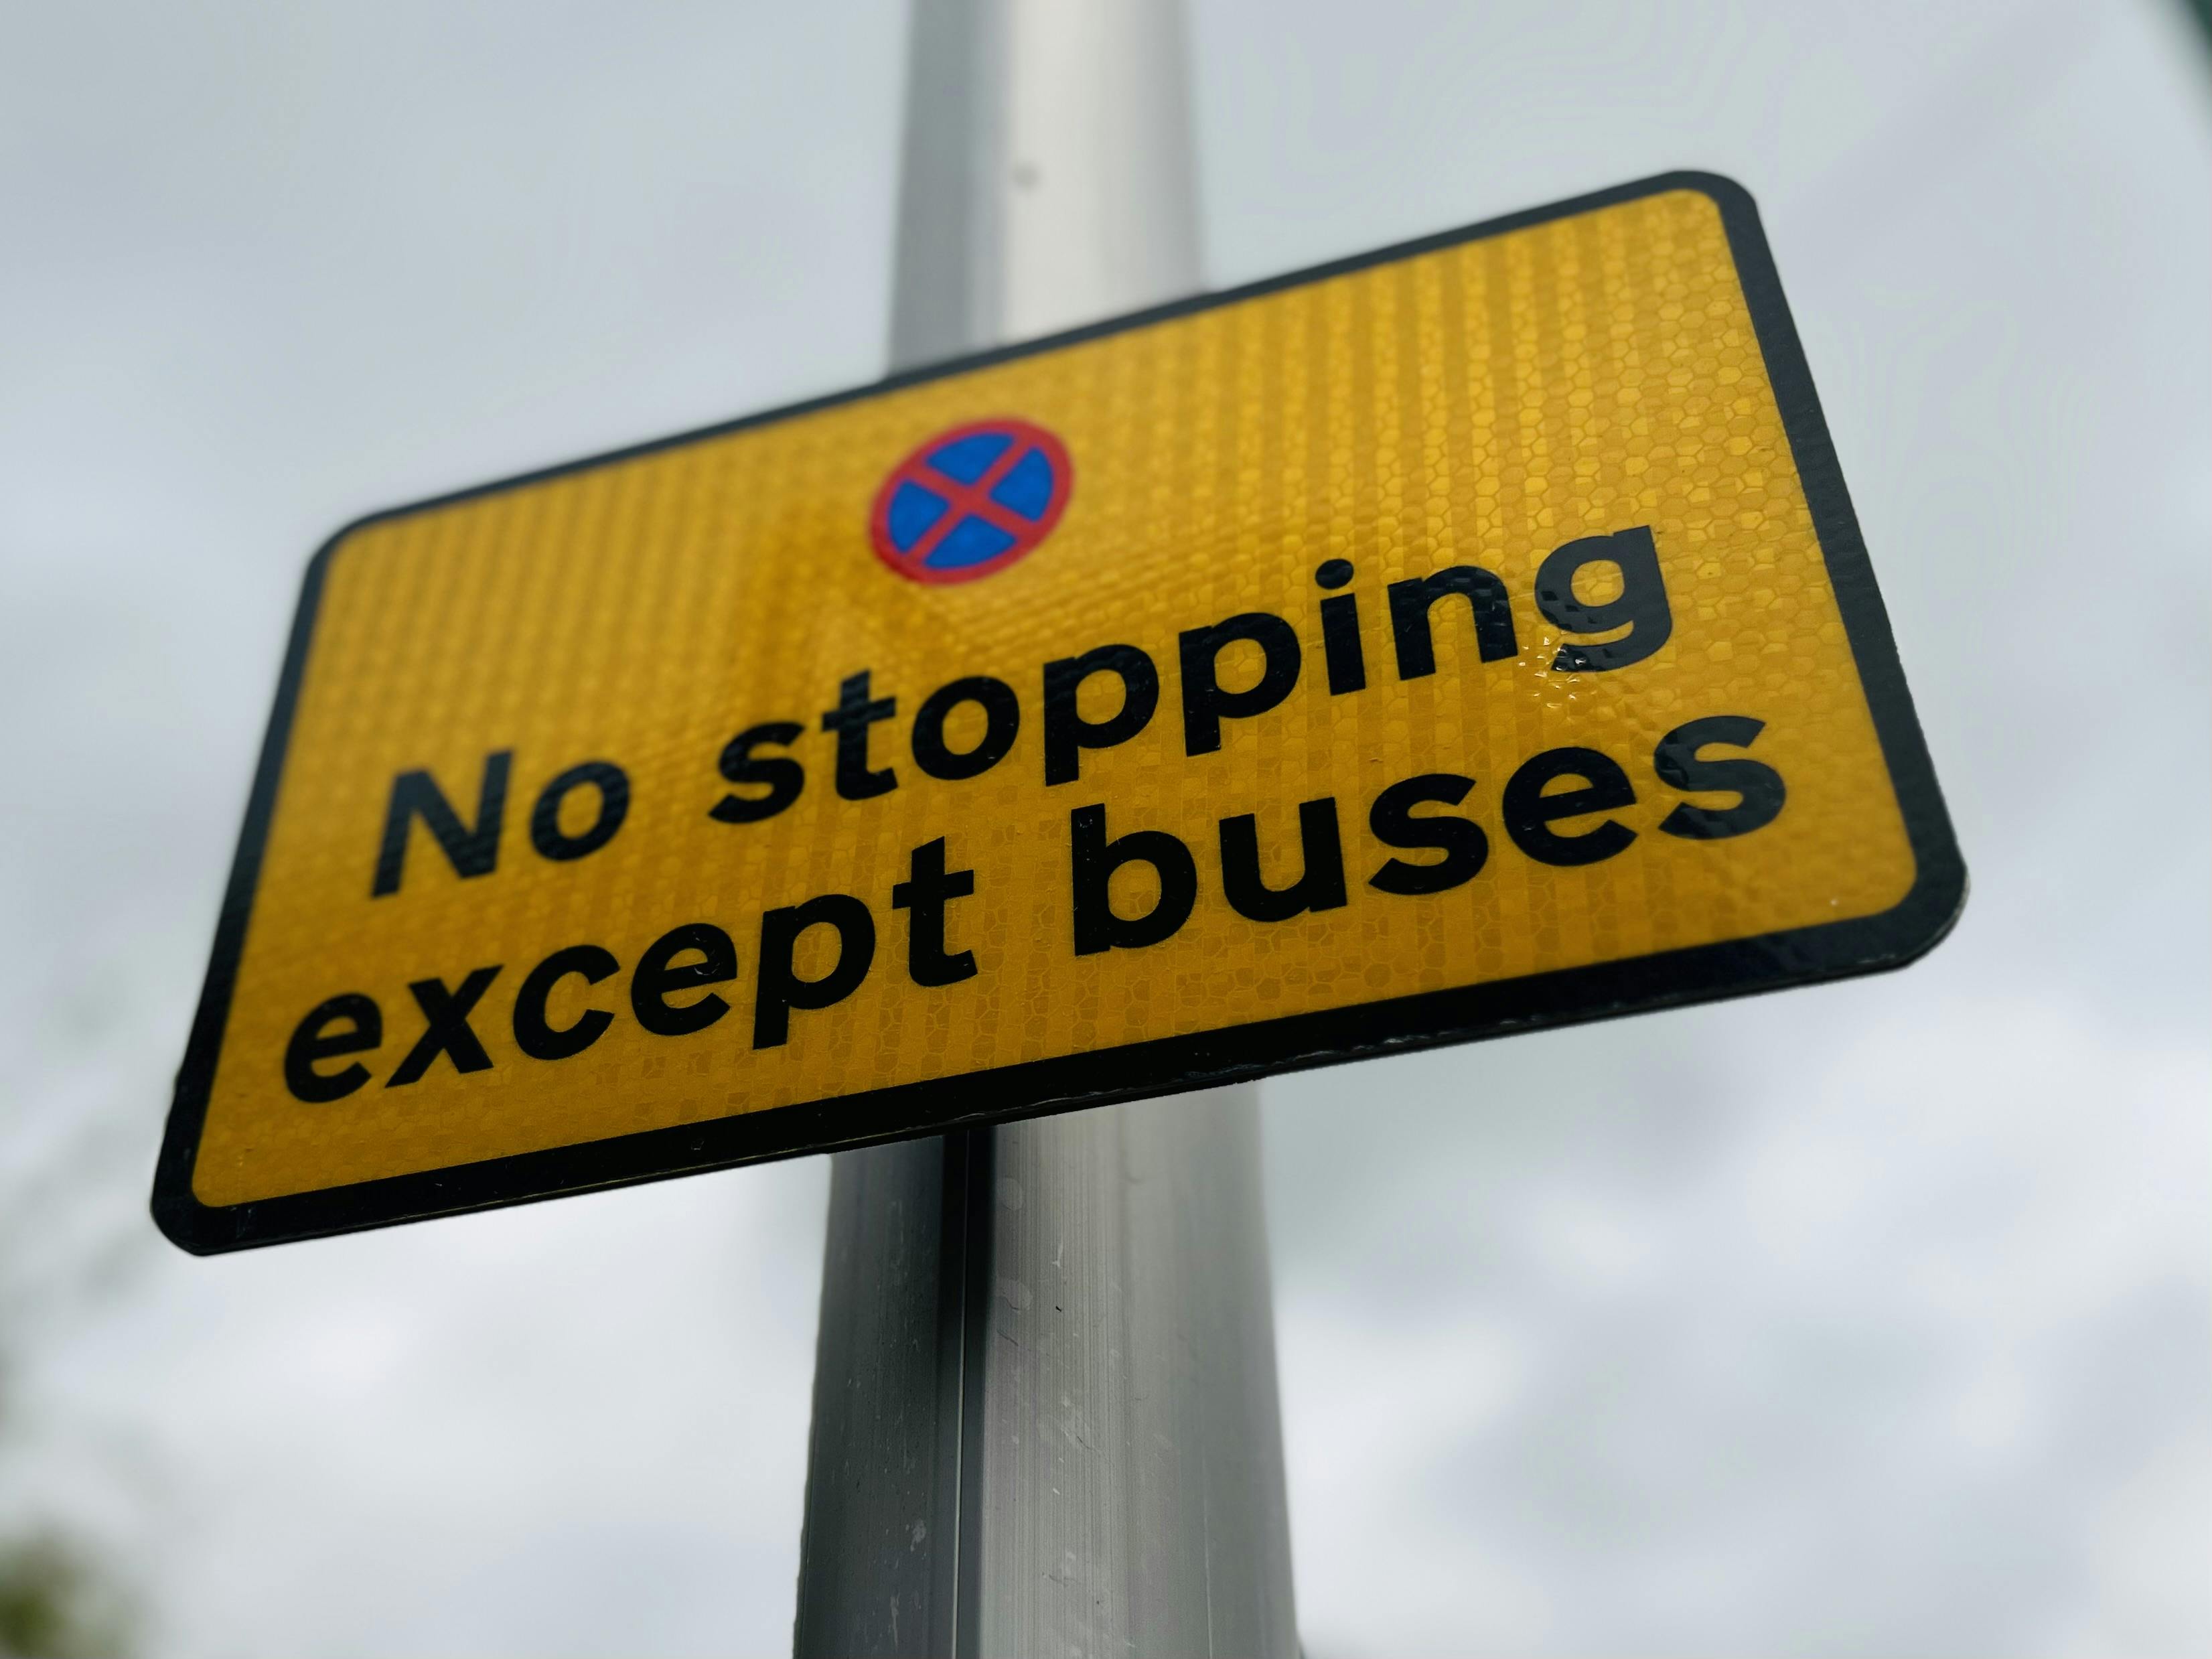 Bus sign no stopping except buses